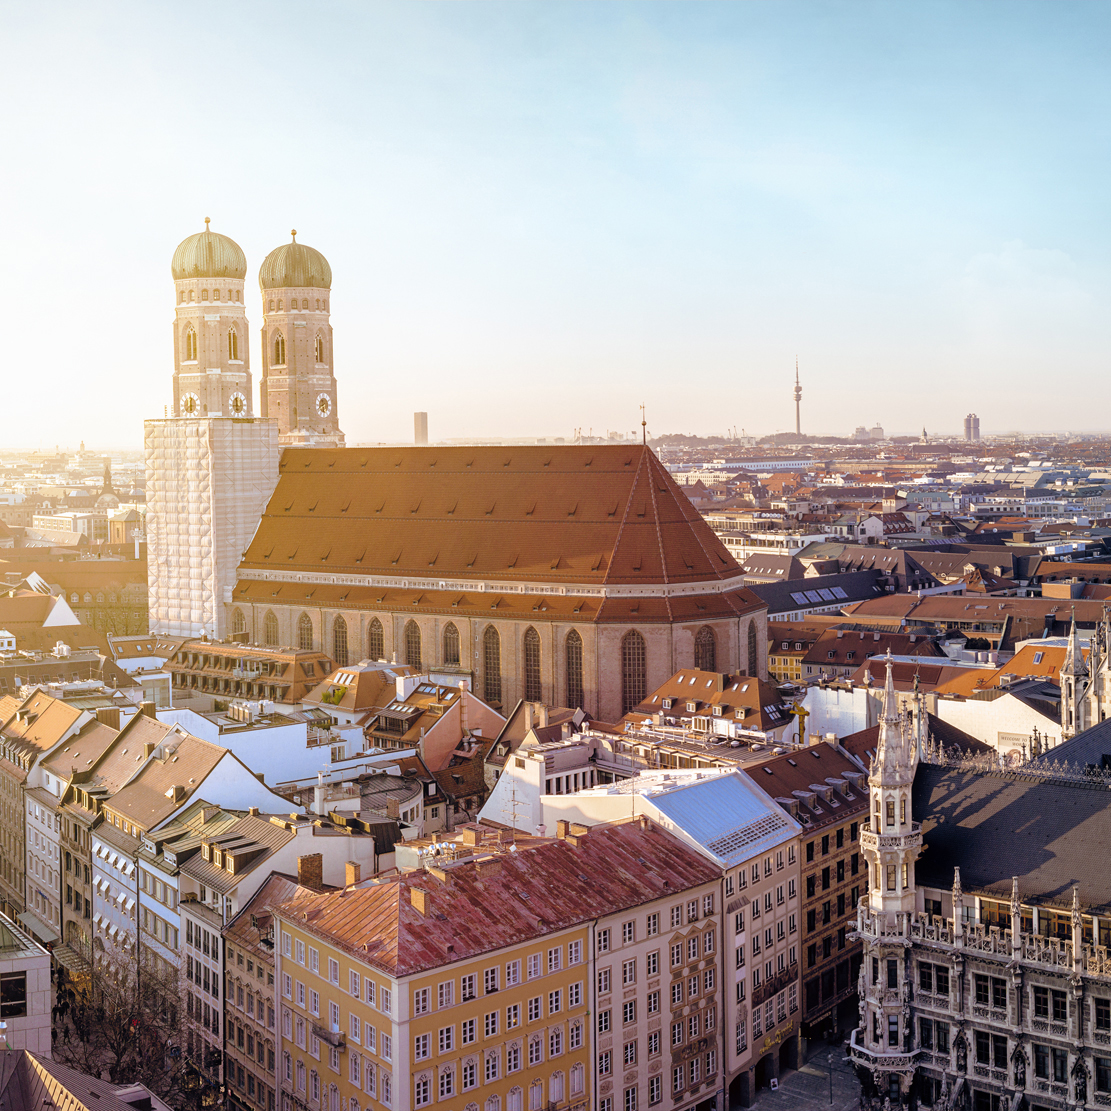 The image shows the city of Munich.